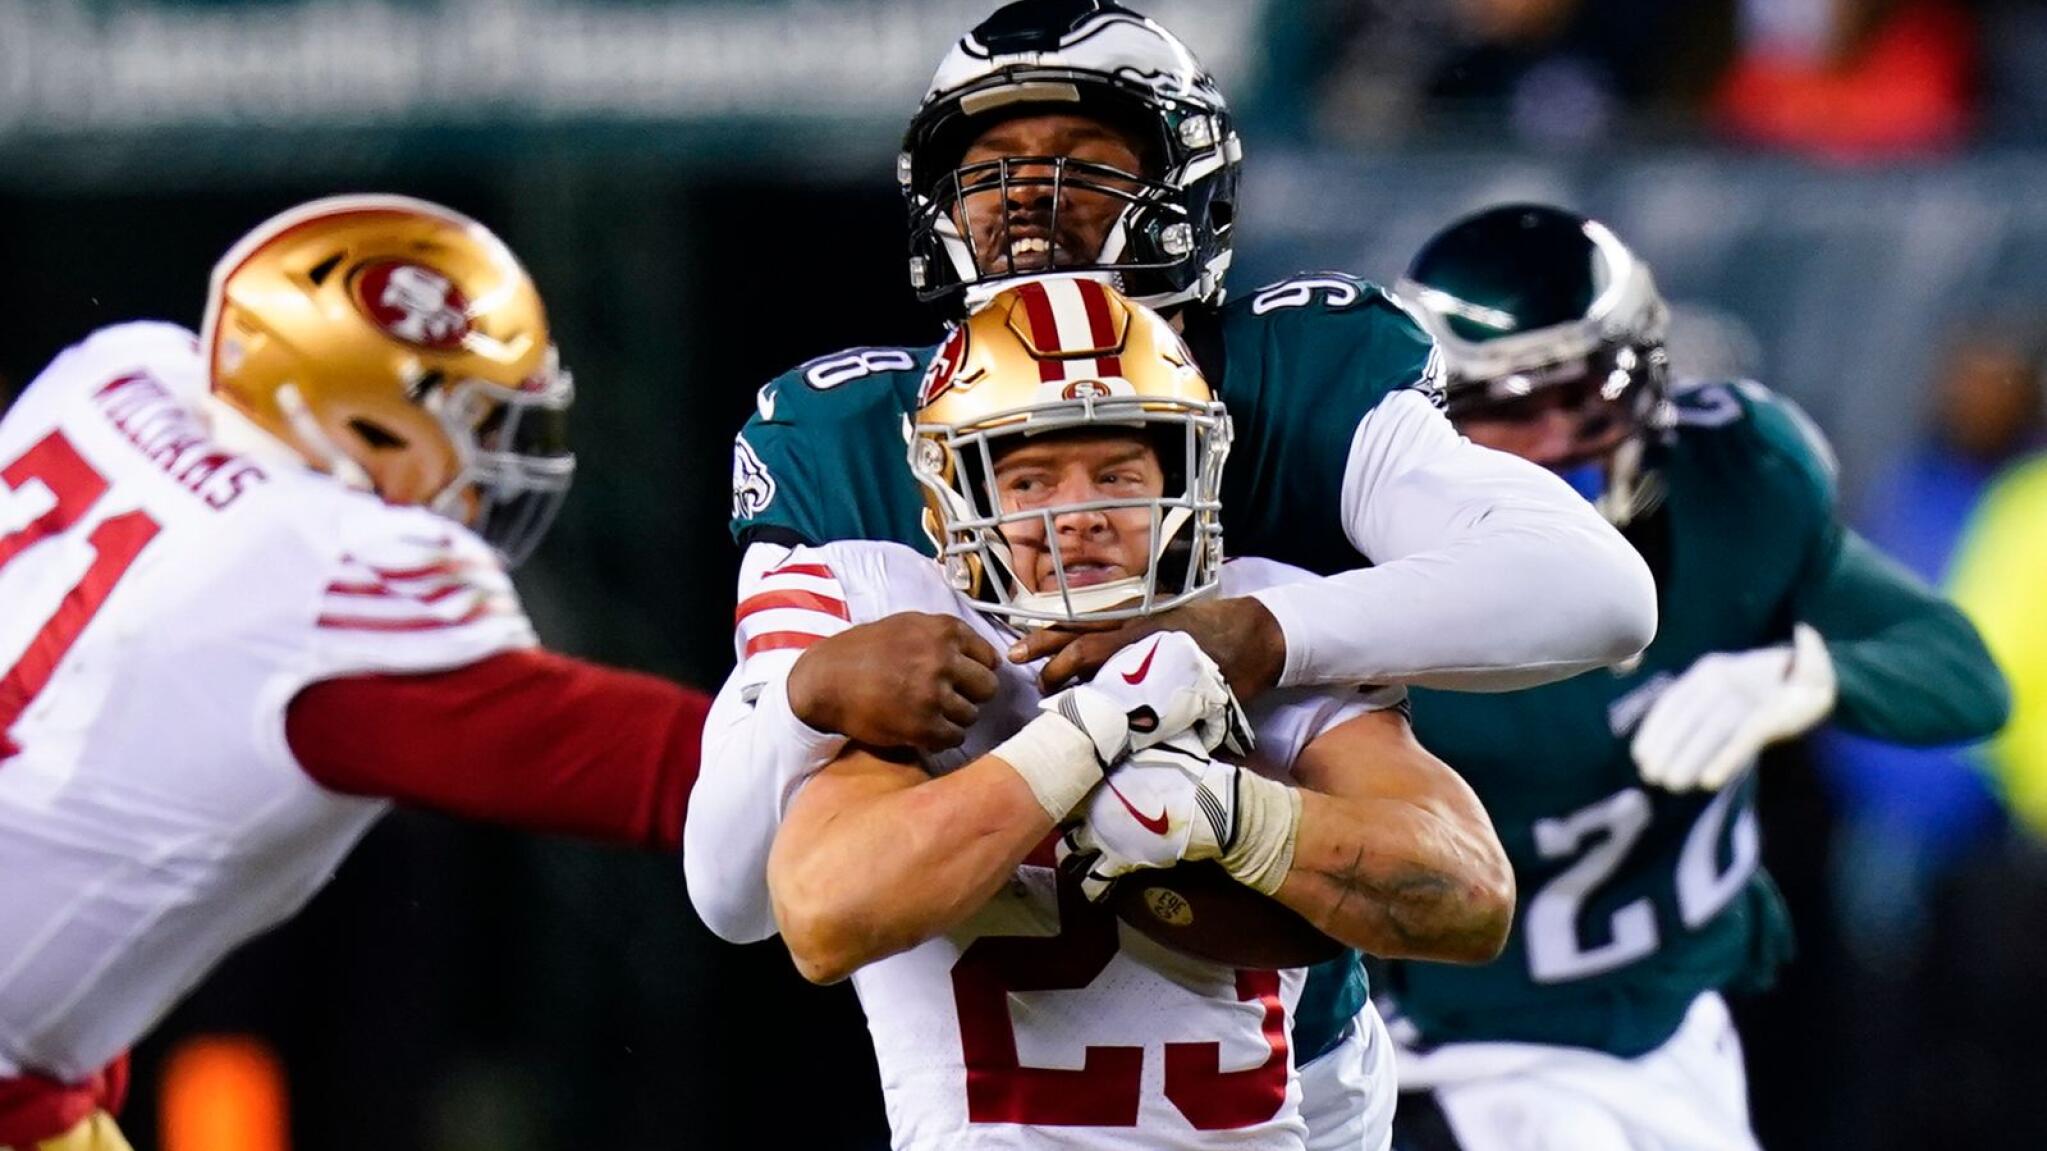 Eagles soar into Super Bowl, rout 49ers for NFC title